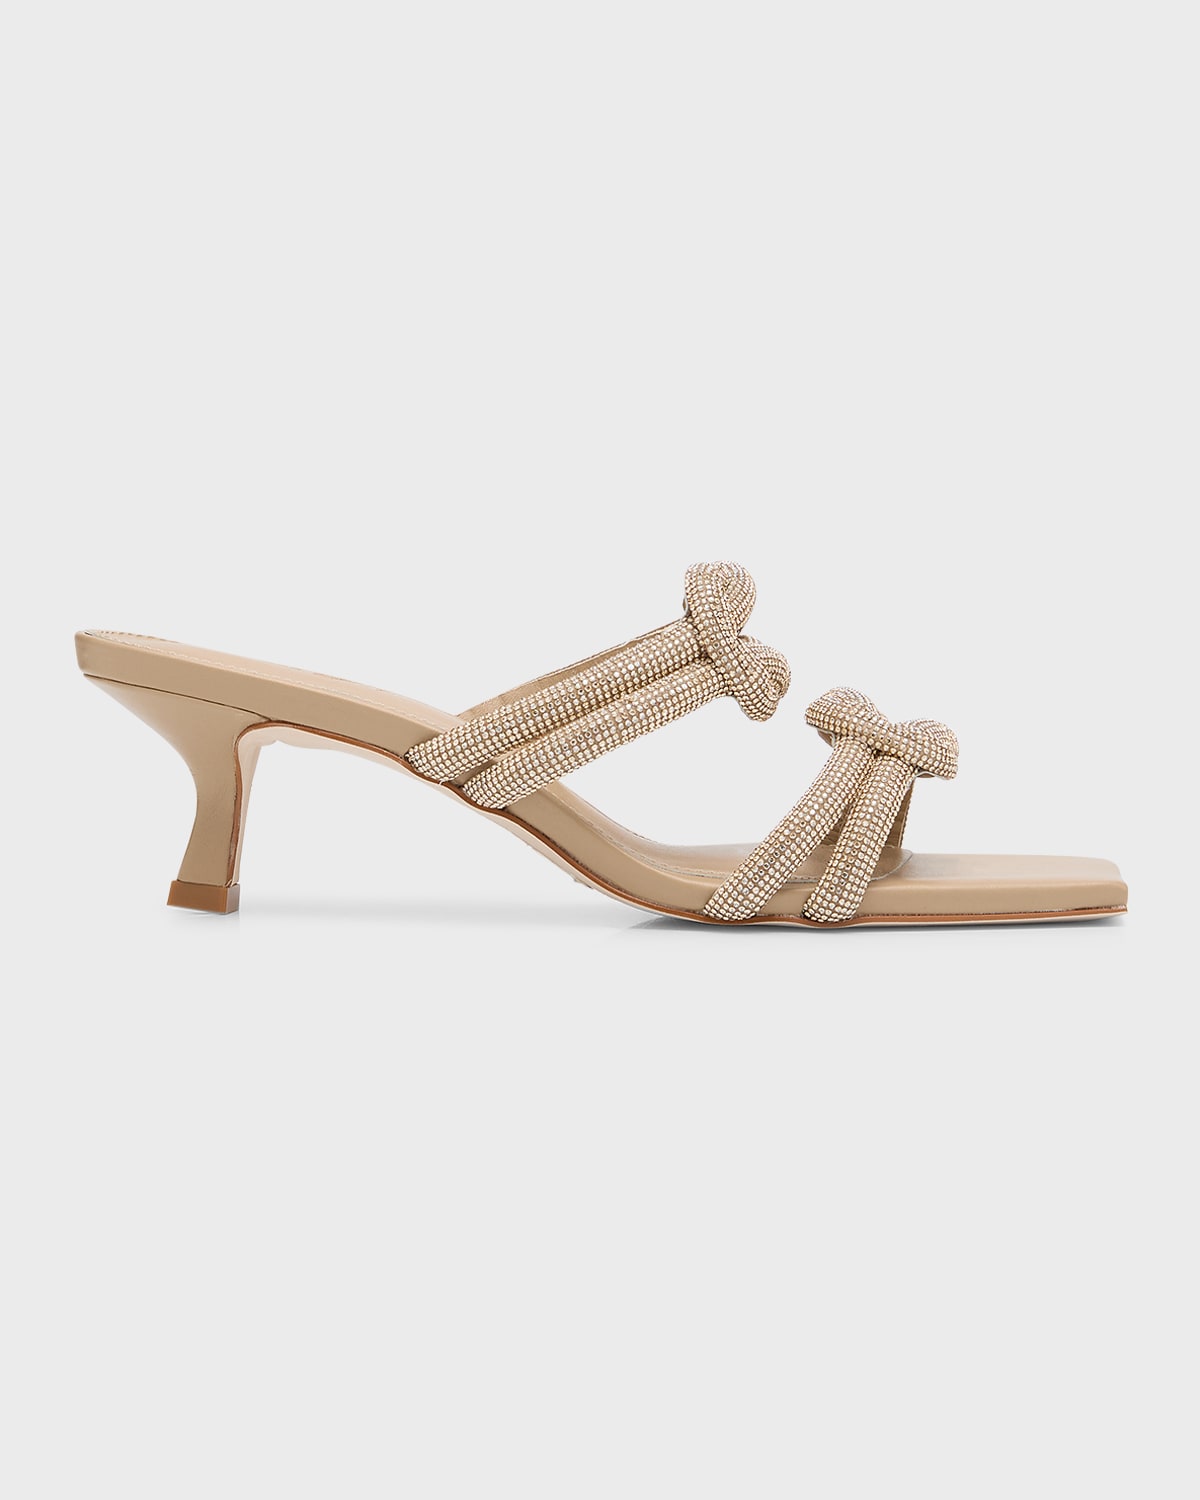 Cult Gaia Agyness Crystal Knot Slide Sandals In Sand Dollar